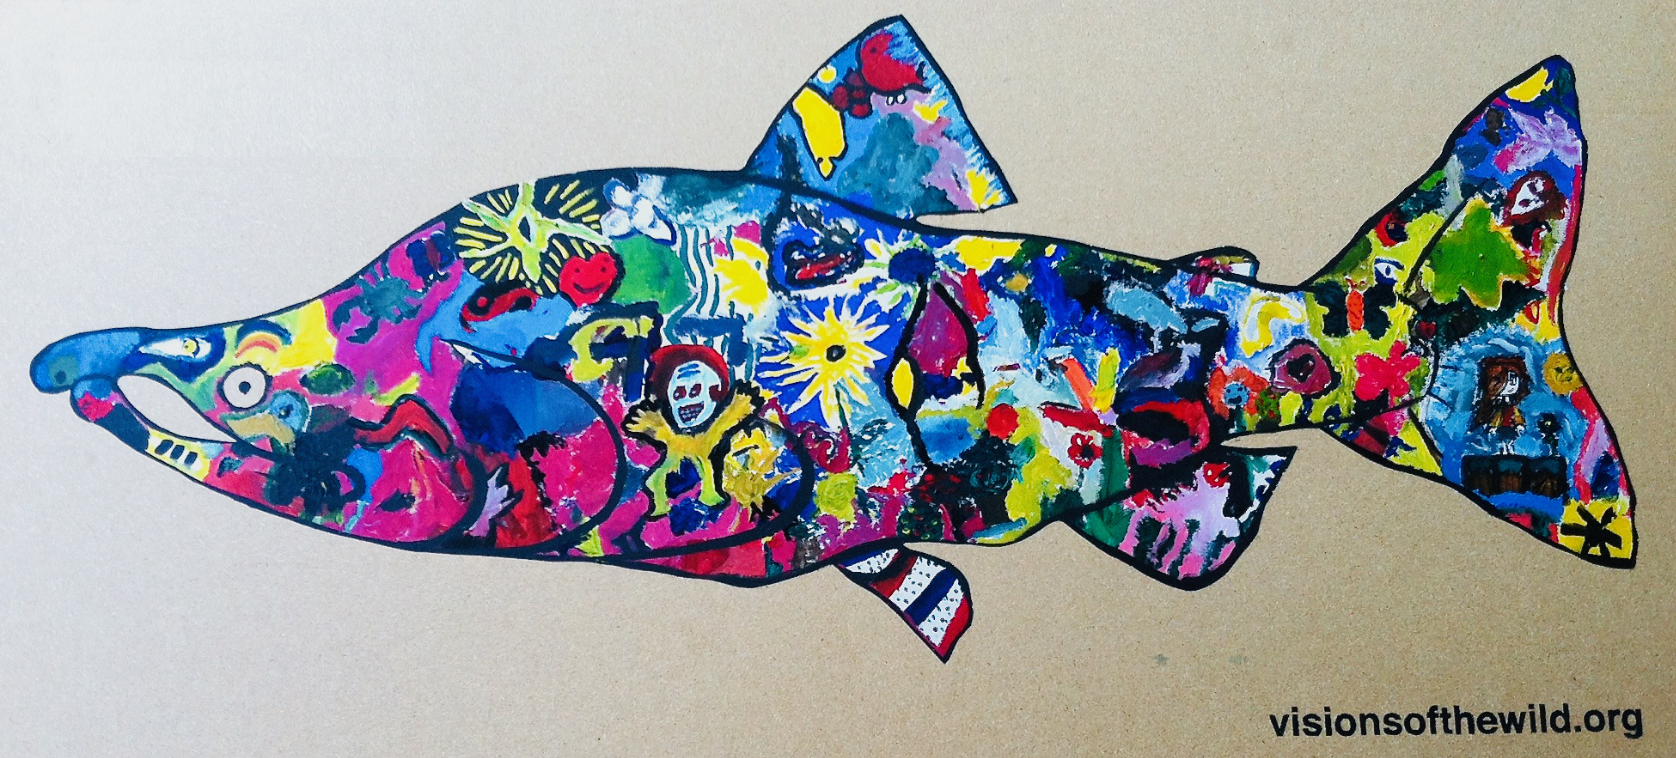 a painting of a salmon, comprised of smaller images of what participants found joyful